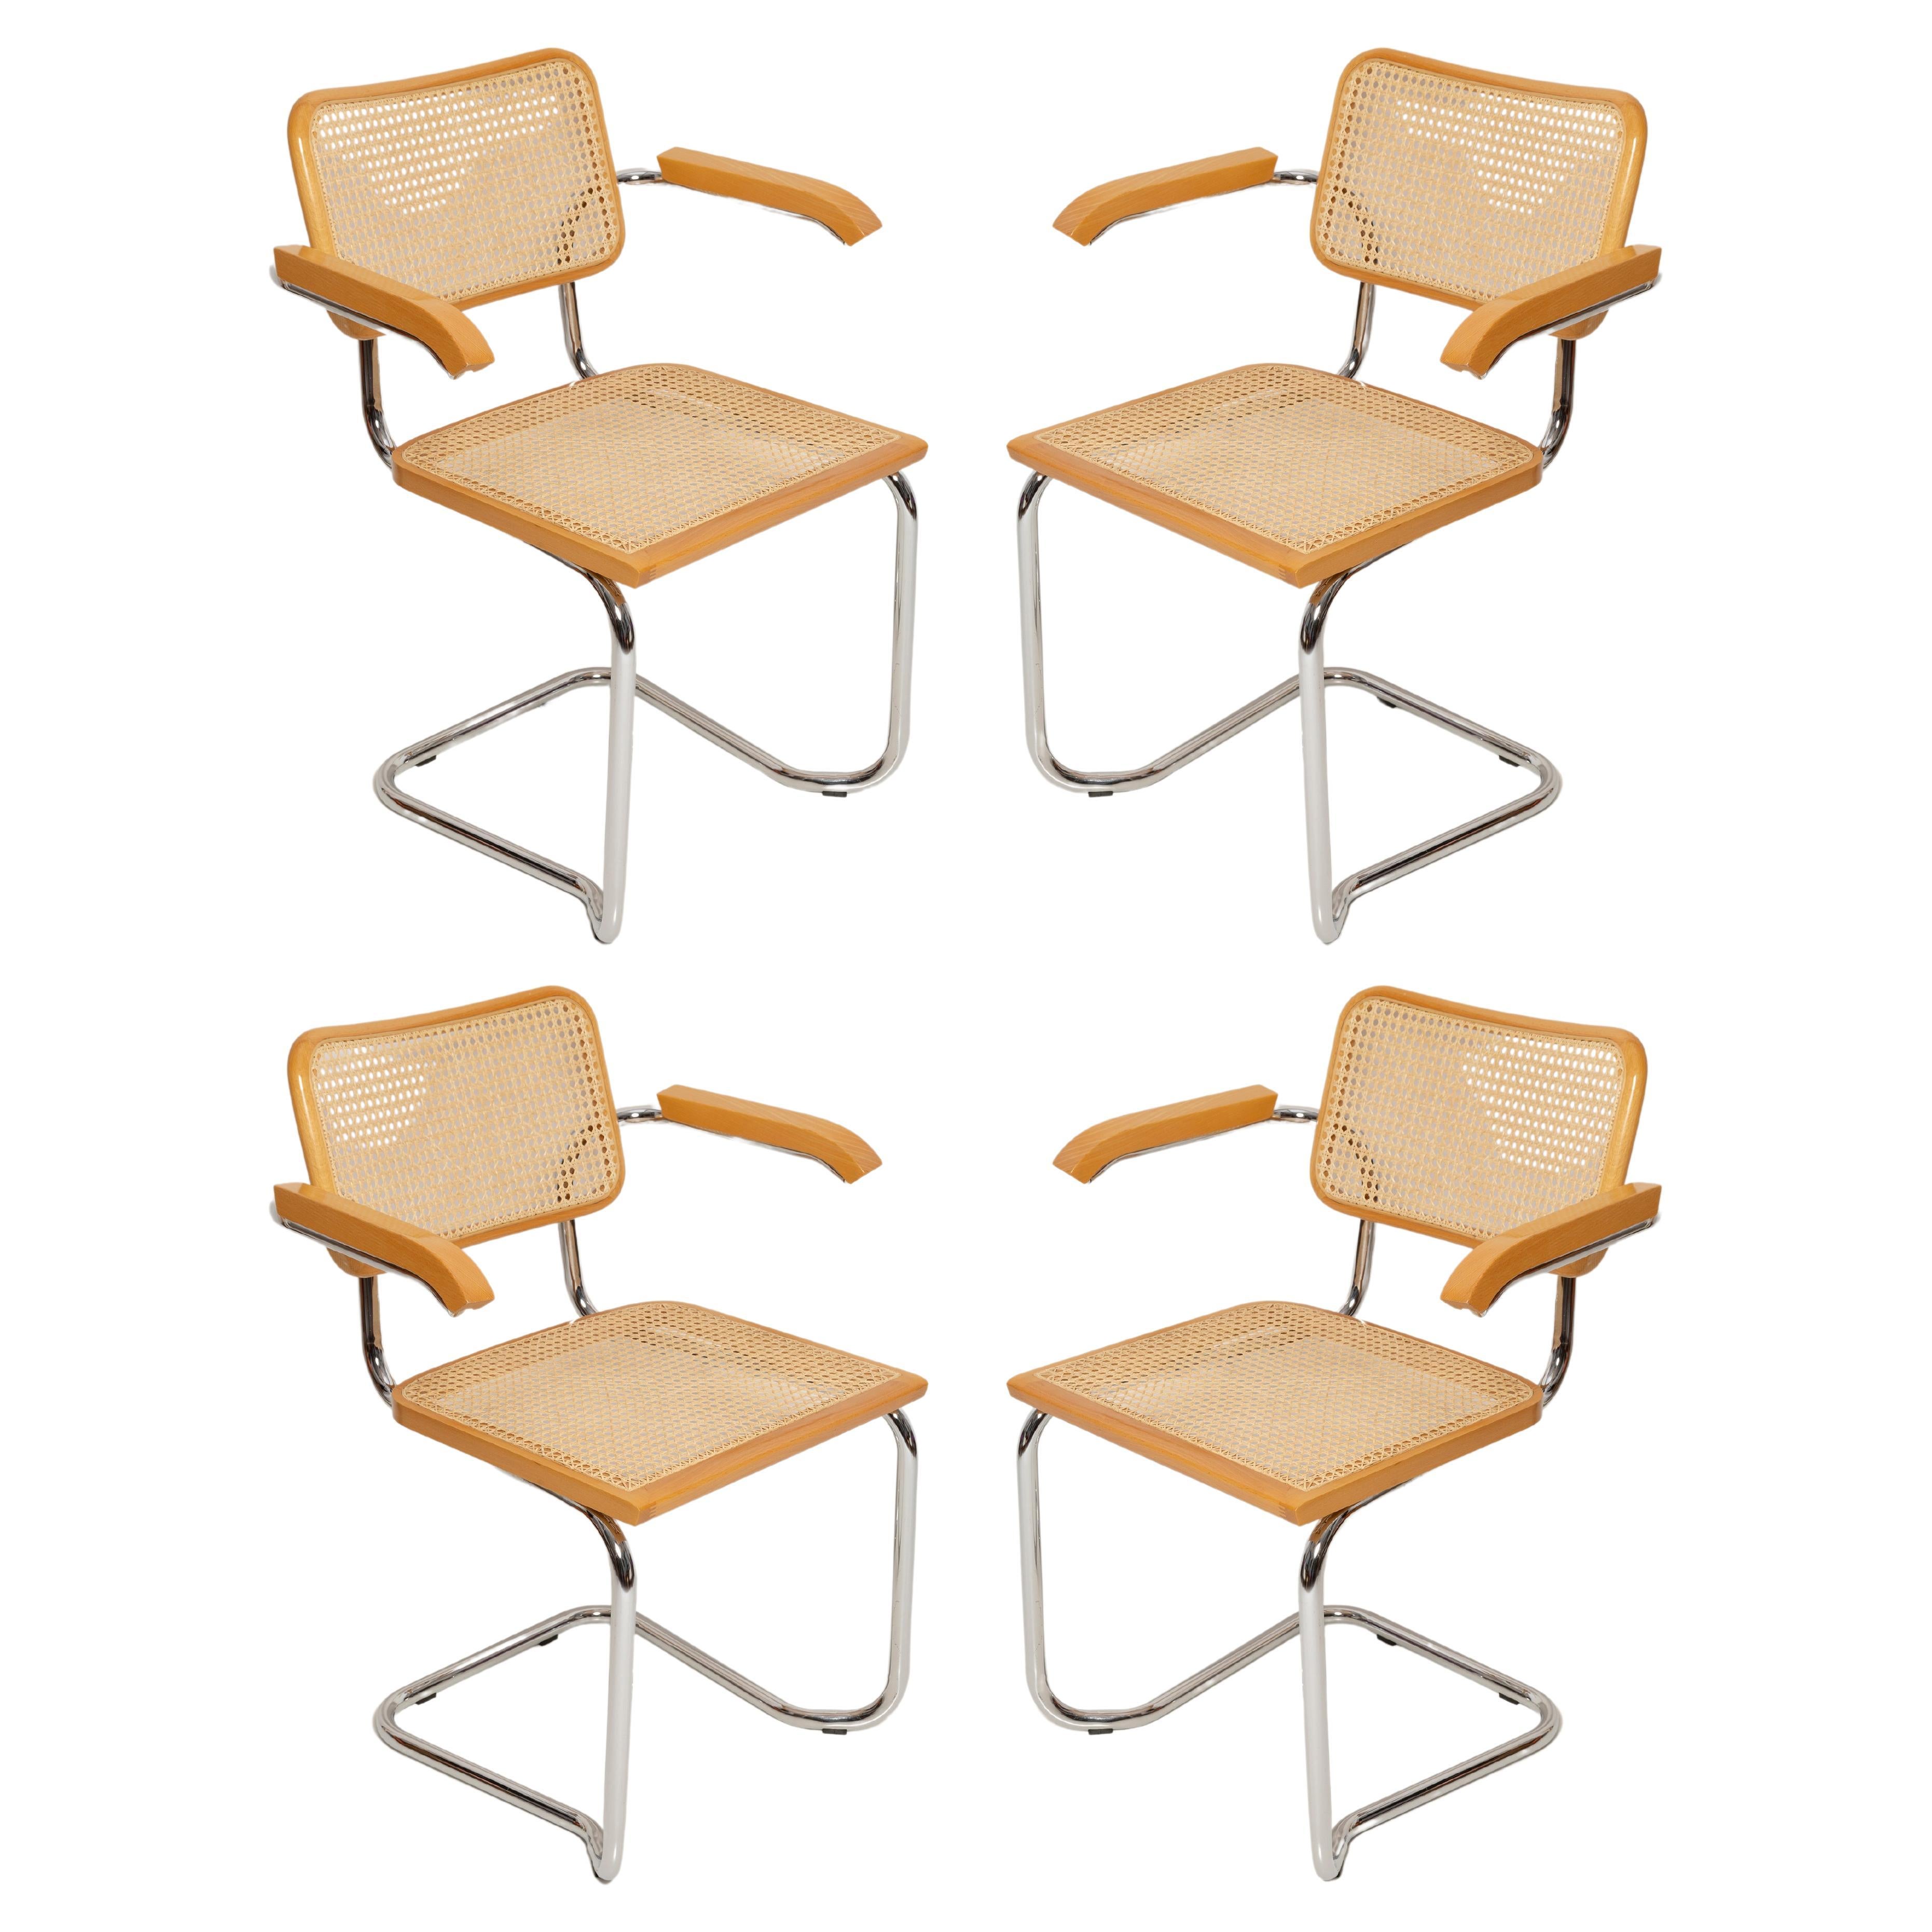 Set of Four Midcentury Cesca Rattan Chairs, Marcel Breuer, Italy, 1960s